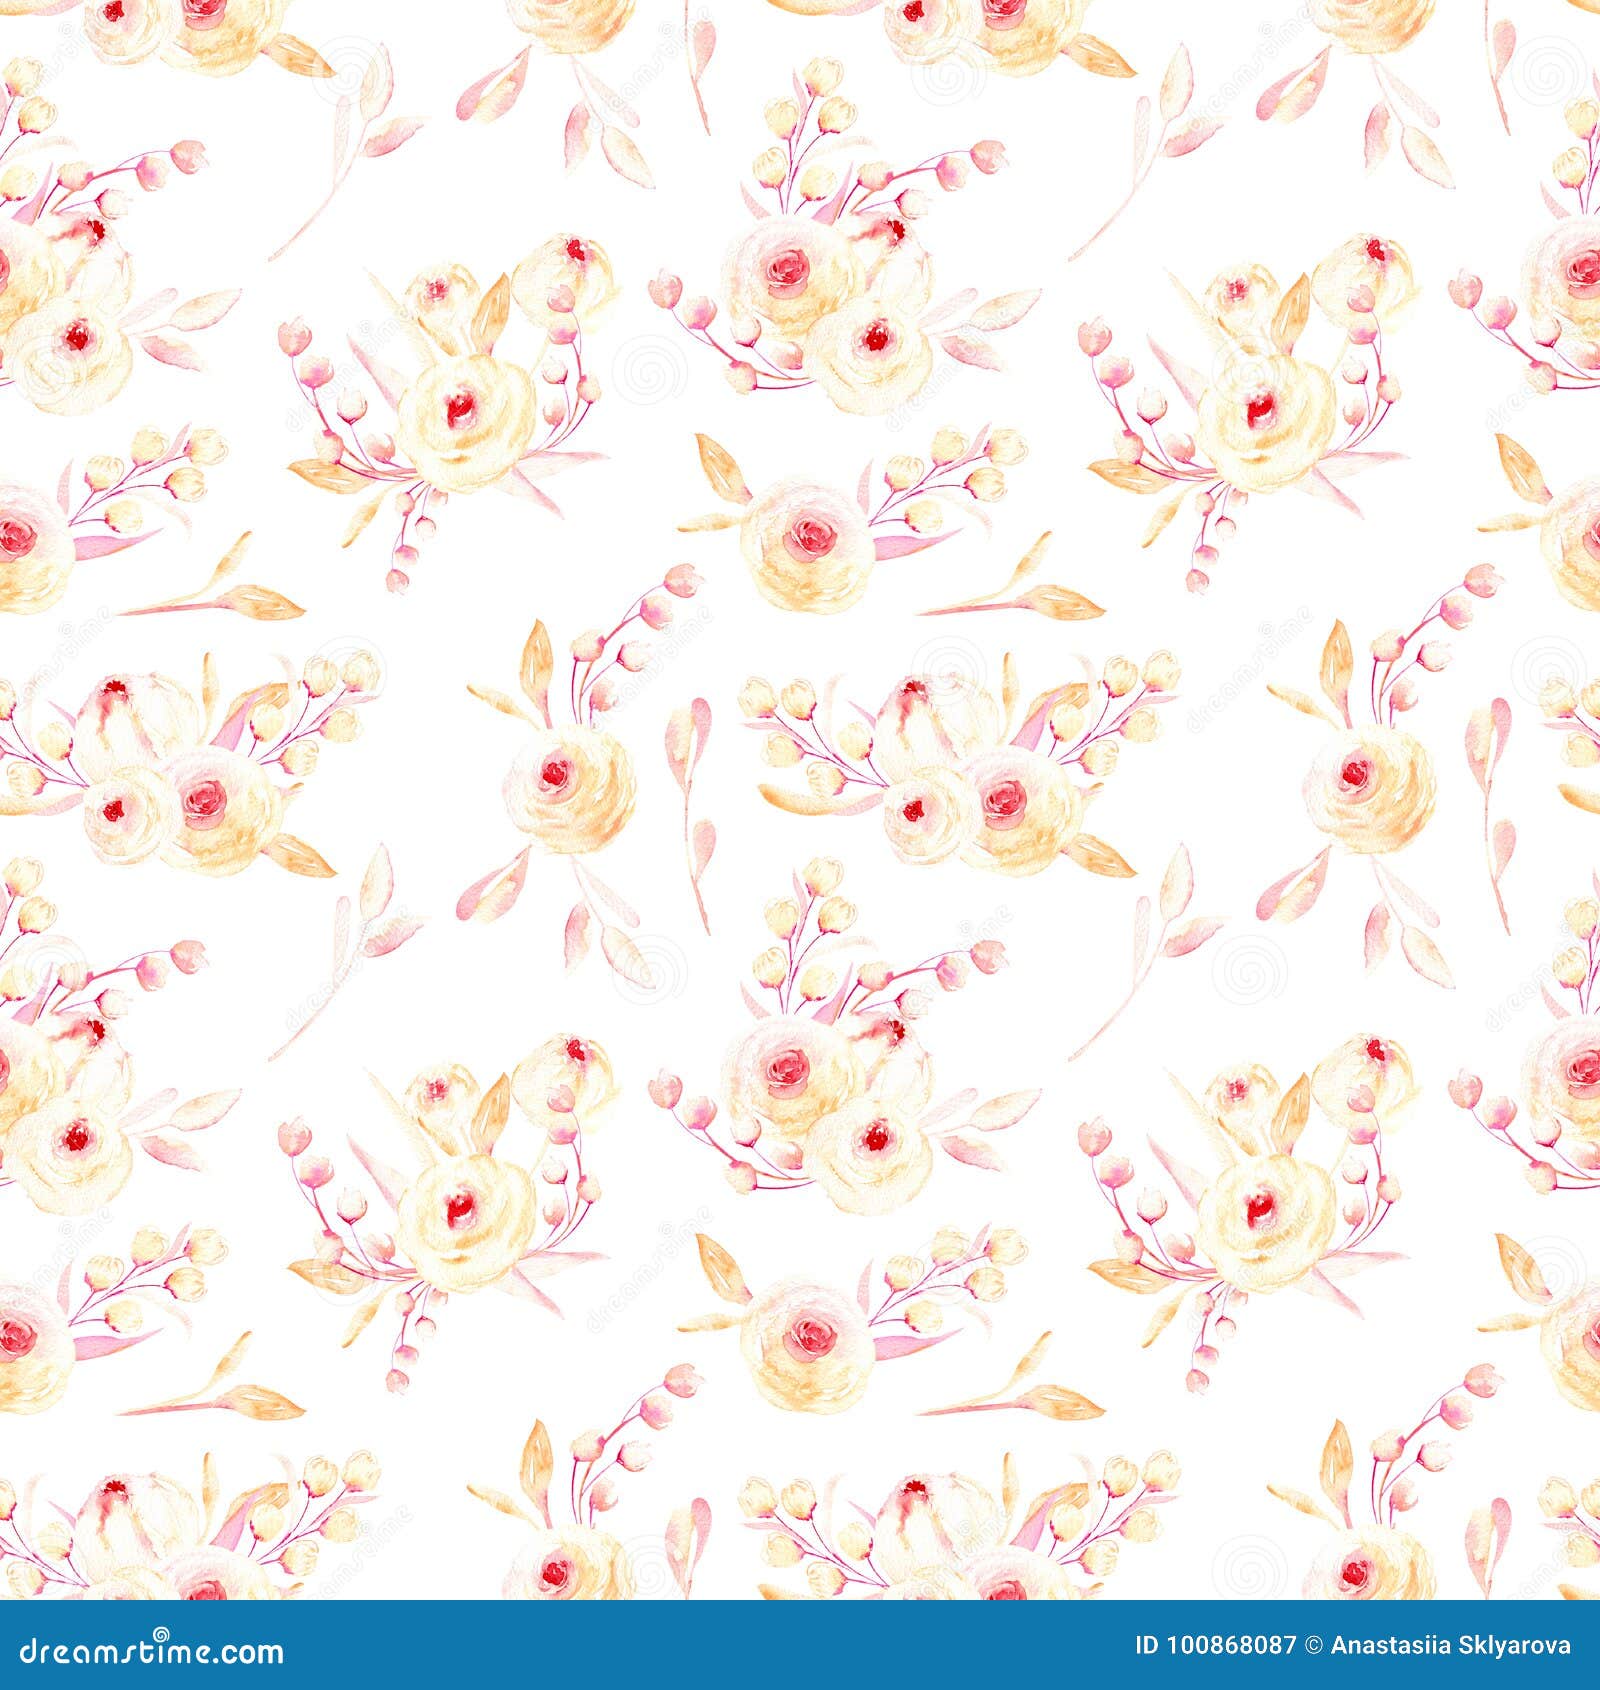 Download Seamless Floral Pattern With Pink Watercolor Flower Posies ...